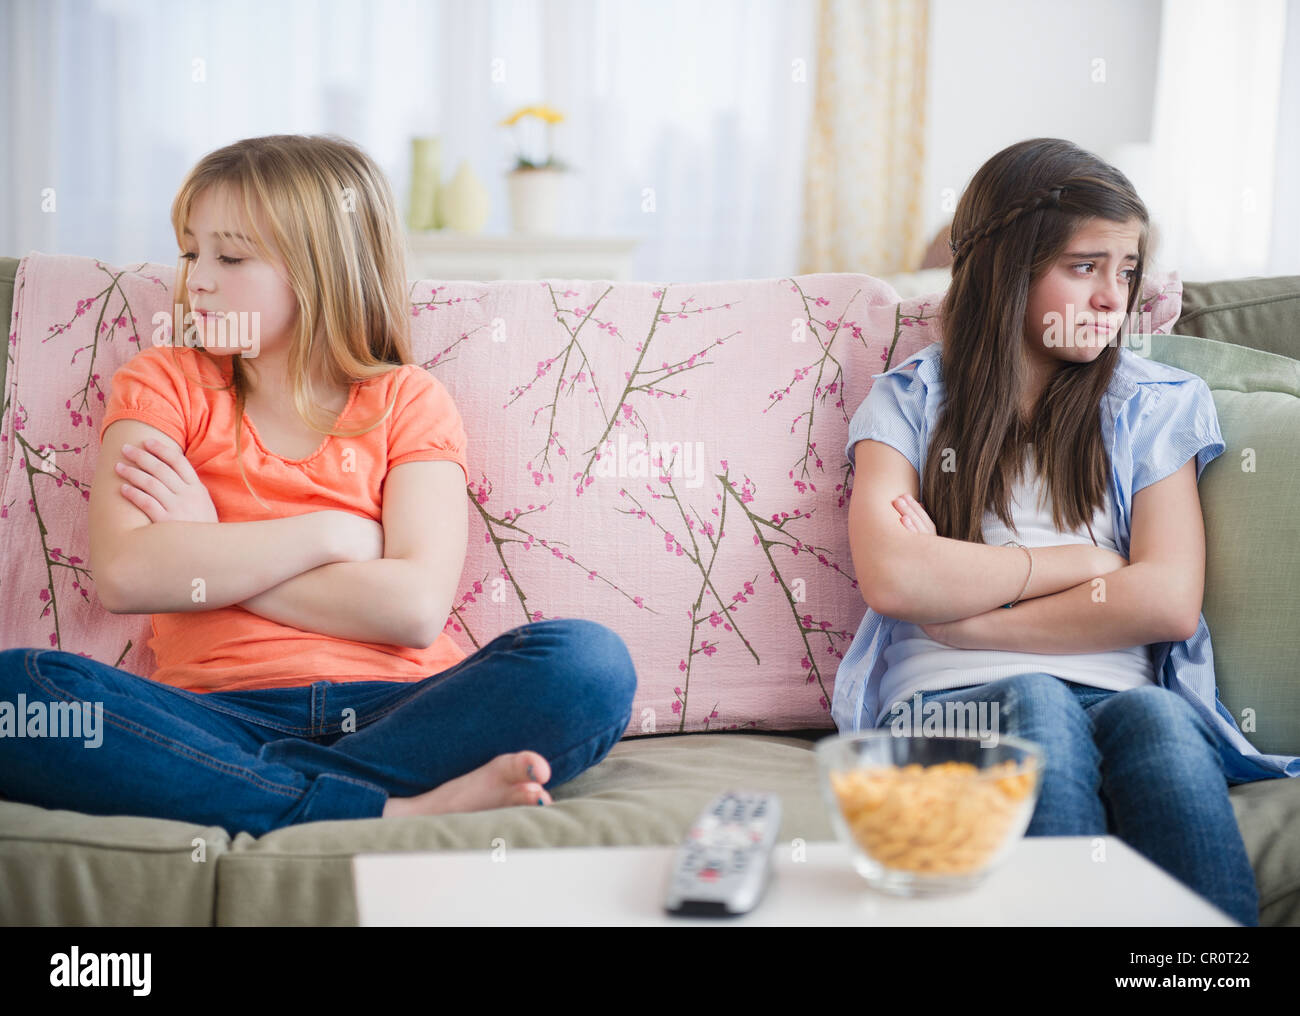 USA, New Jersey, Jersey City, Two girls sitting on sofa and showing disgust Stock Photo